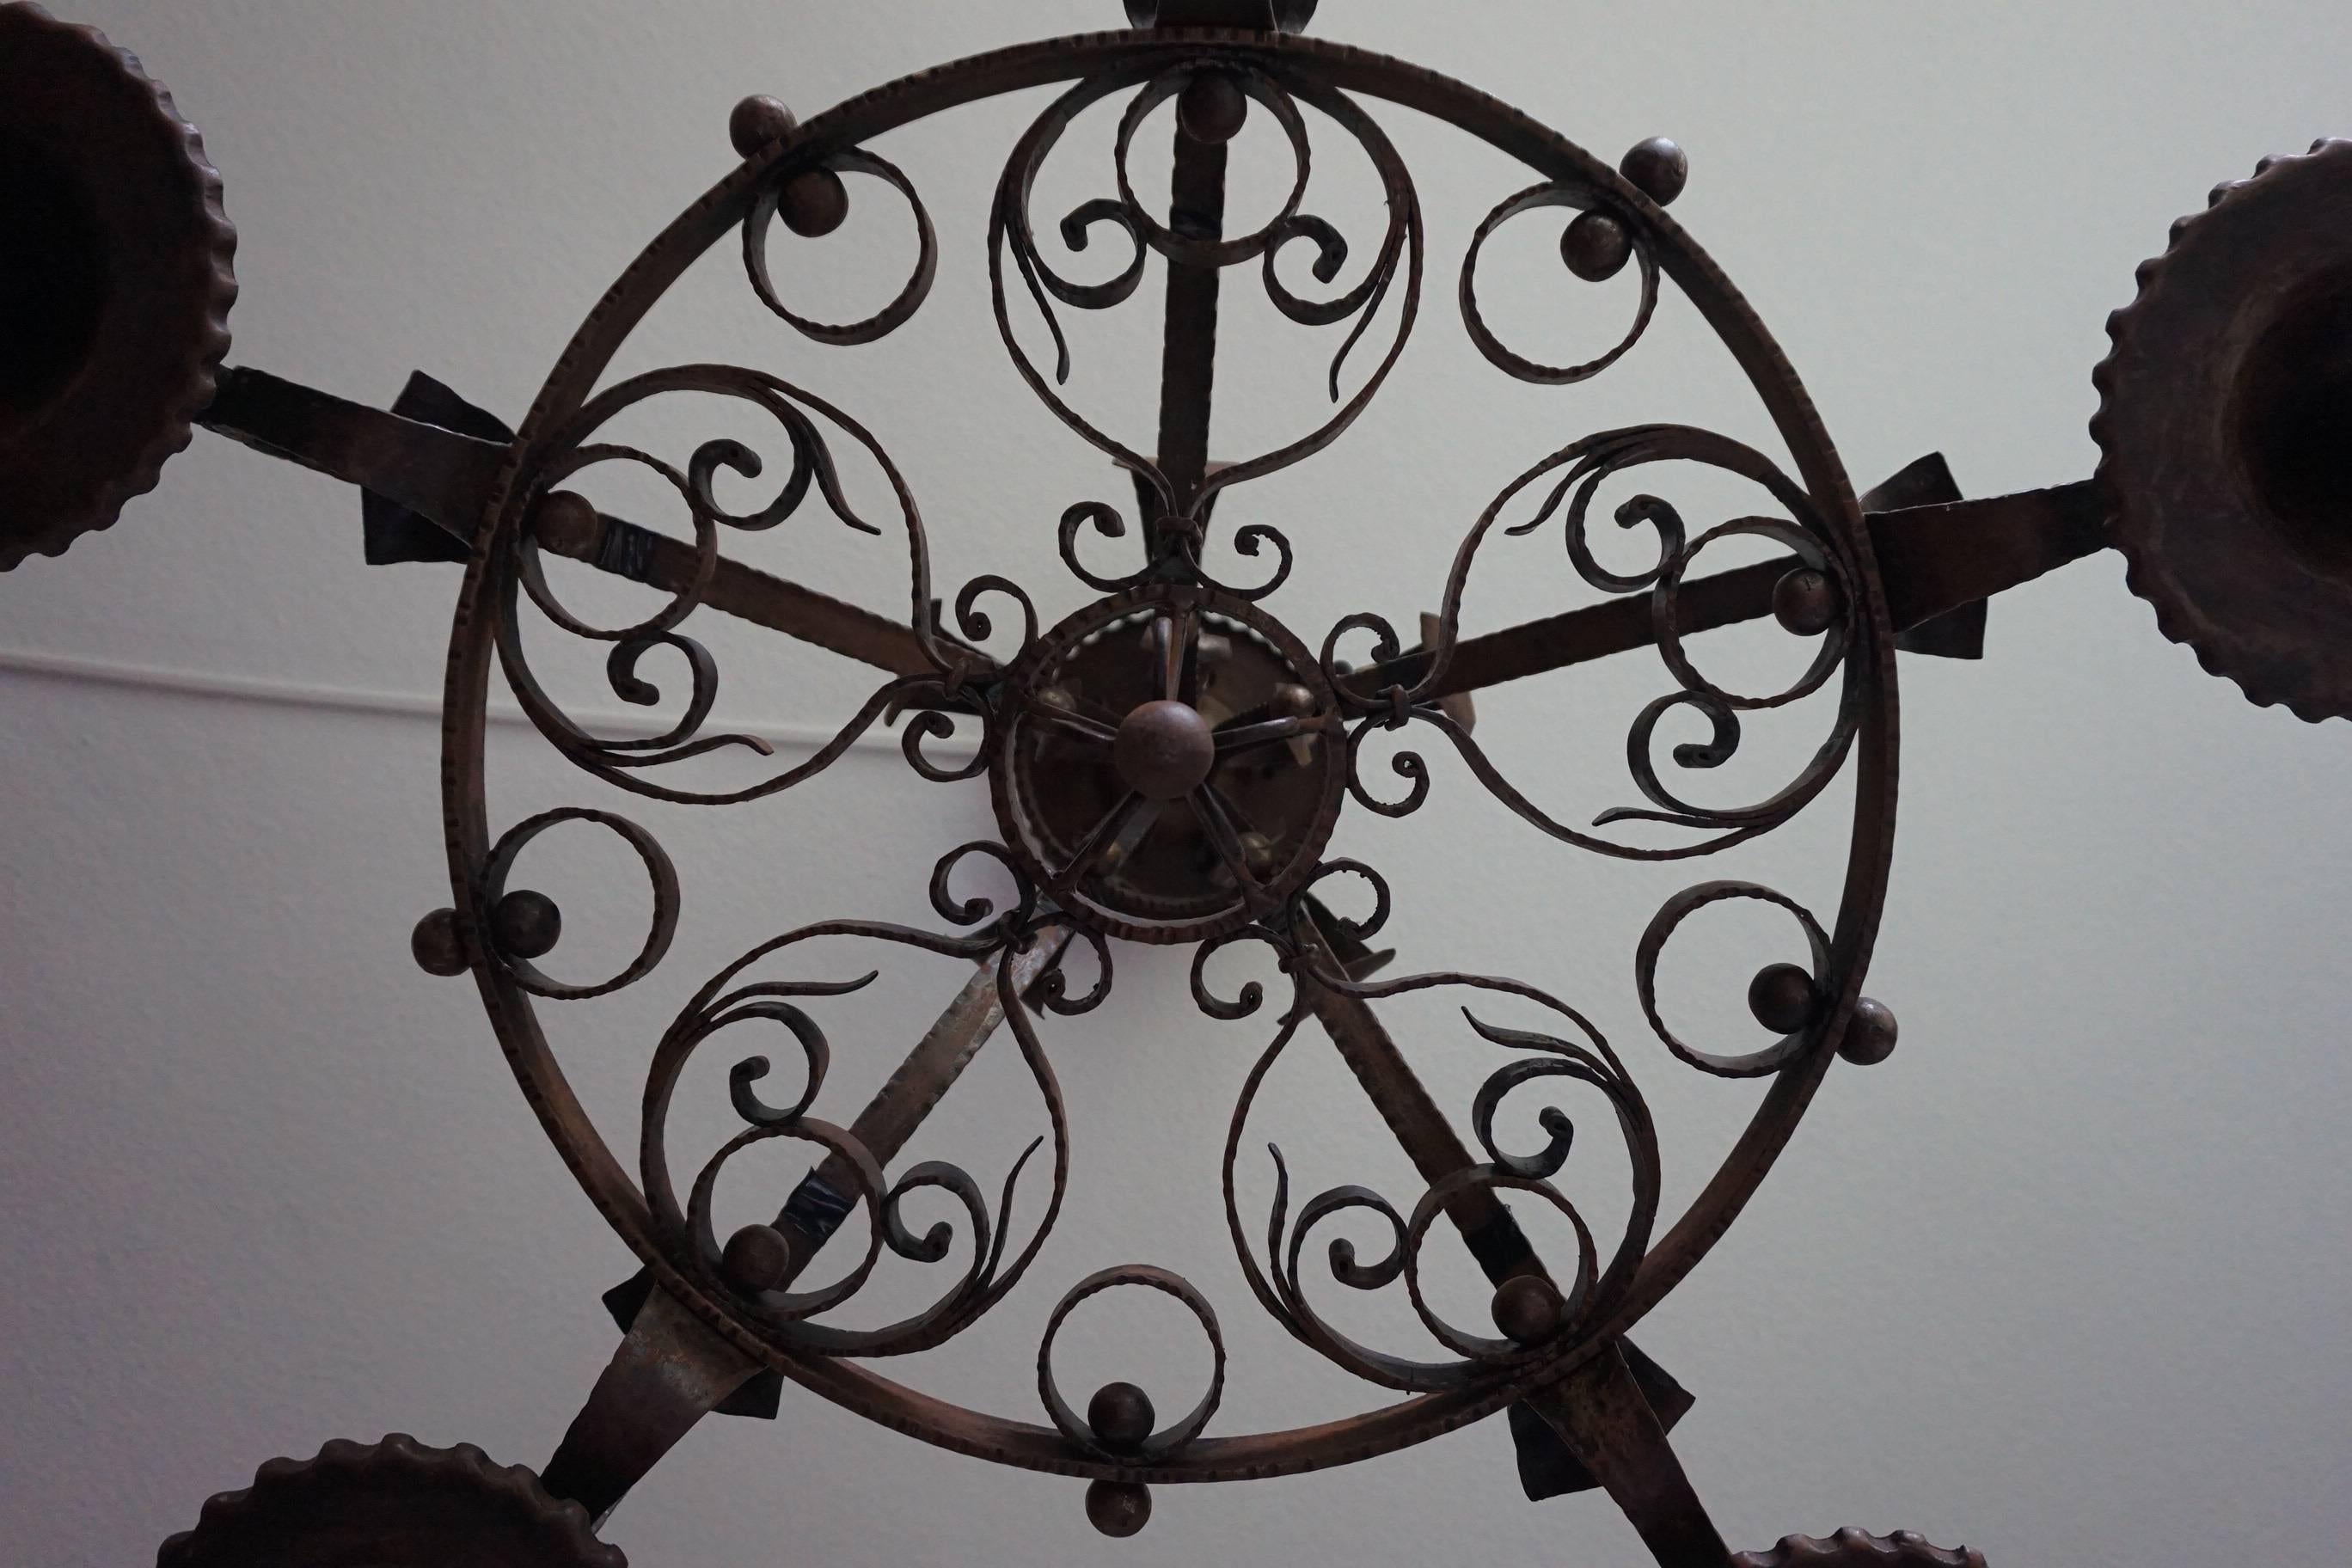 European Good Size & Hand-Forged Arts & Crafts Wrought Iron Light Fixture or Chandelier